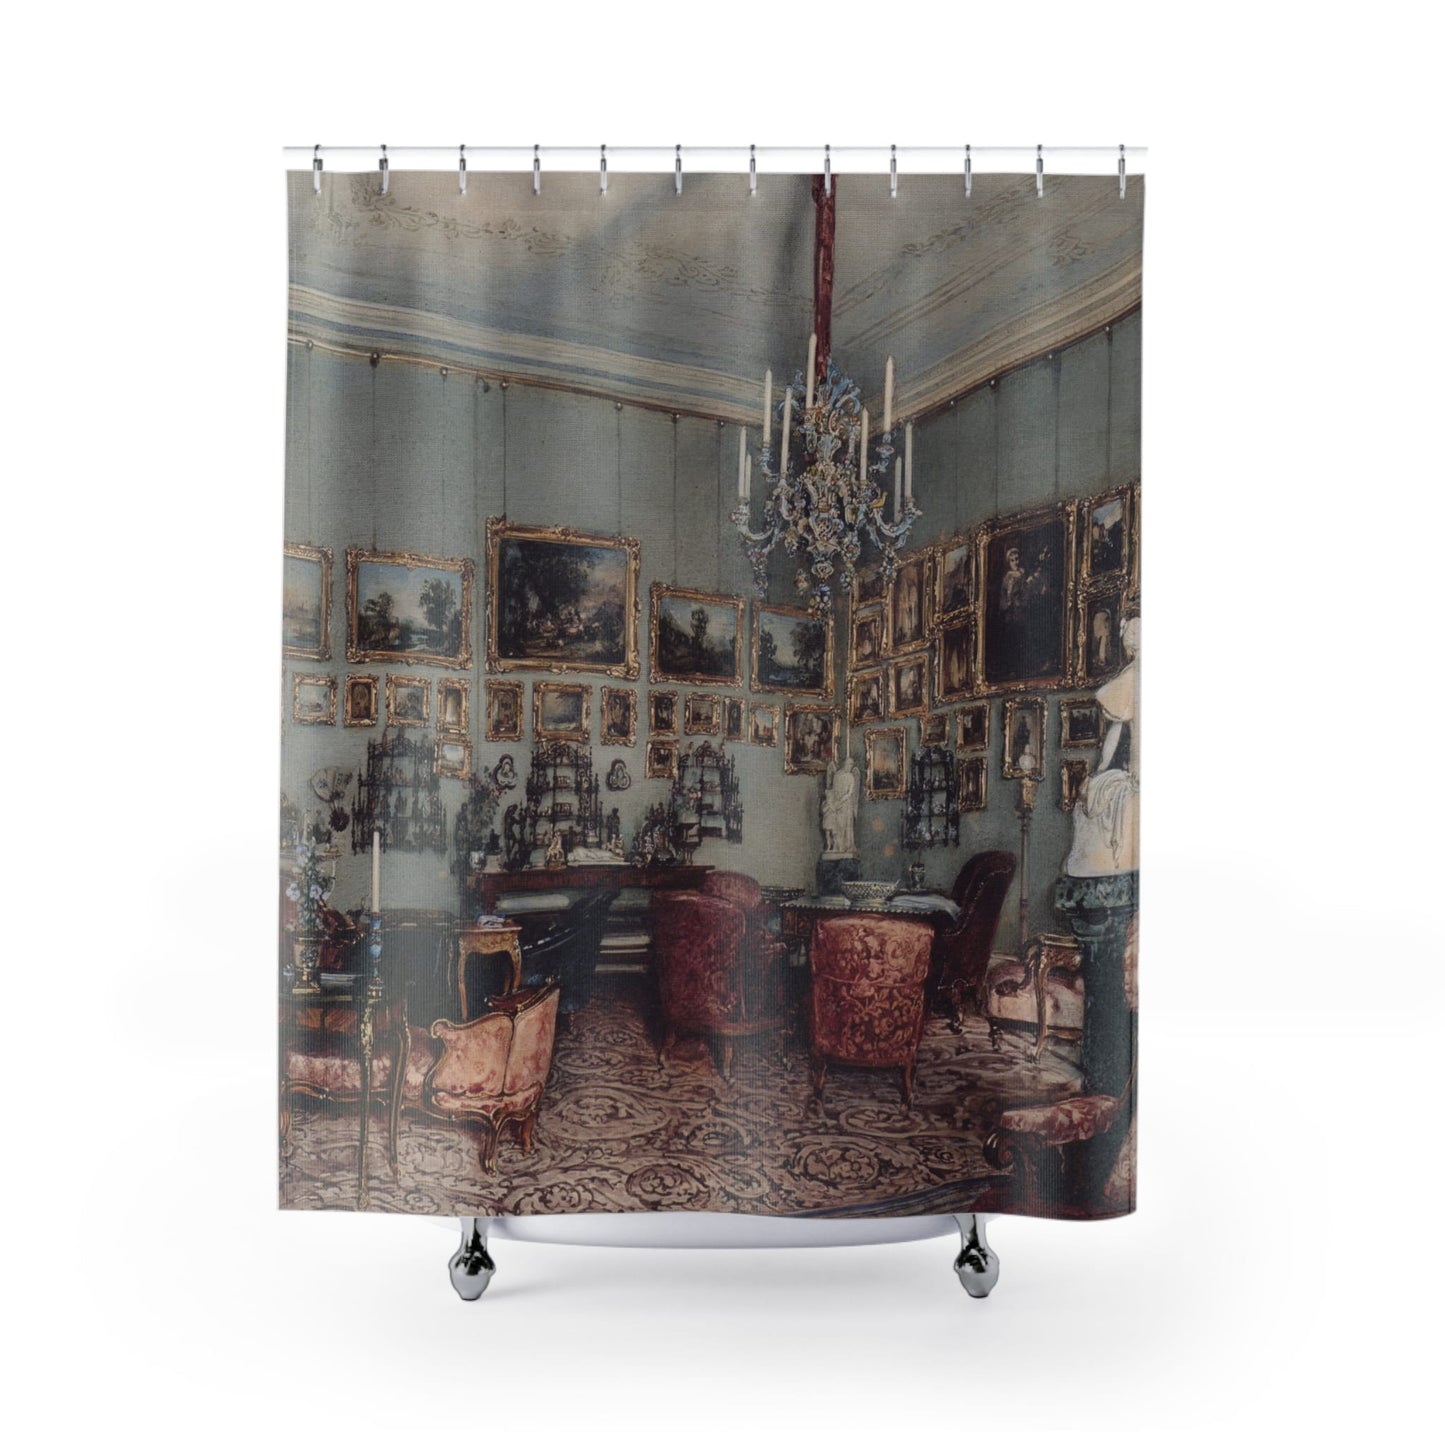 Victorian Decor Shower Curtain with light academia design, scholarly bathroom decor featuring classic Victorian themes.